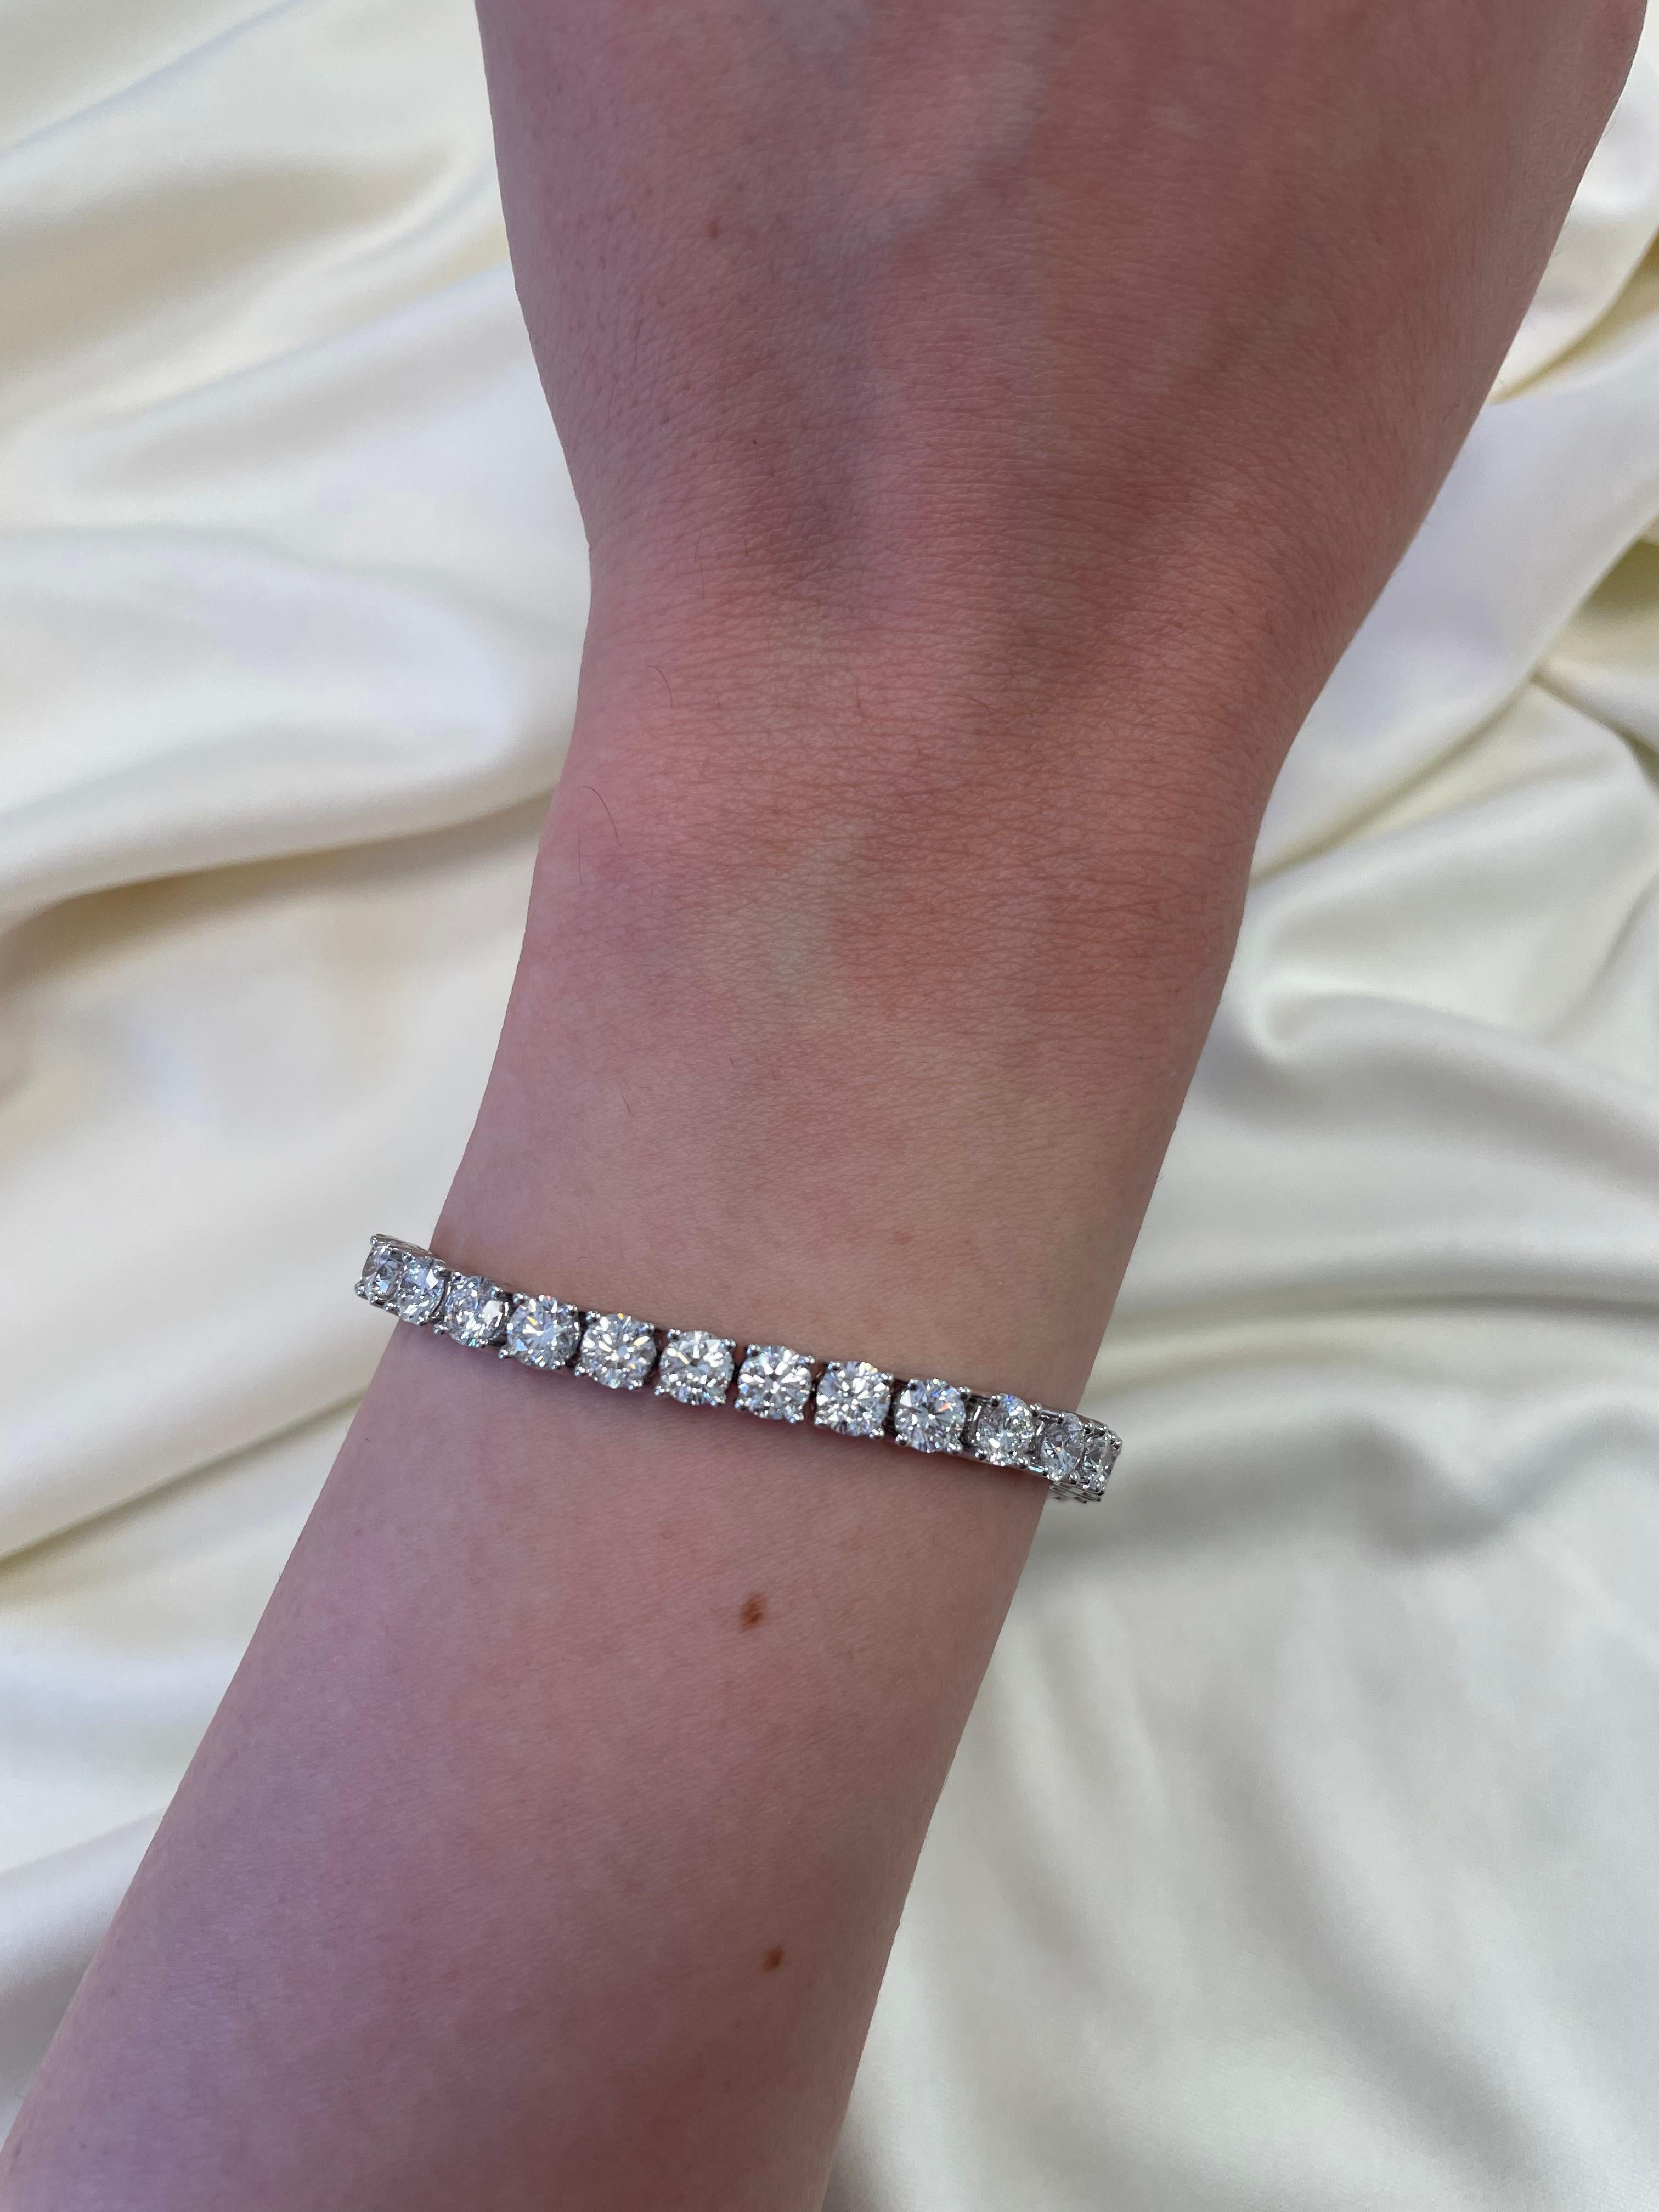 Stunning modern diamond tennis bracelet, all each stone GIA certified. High jewelry by Alexander Beverly Hills.
38 round brilliant diamonds, 11.85ct (0.31ct avg). Each stone GIA certified D color and VS2 clarity. Platinum, 23.09 grams, 7 inches.